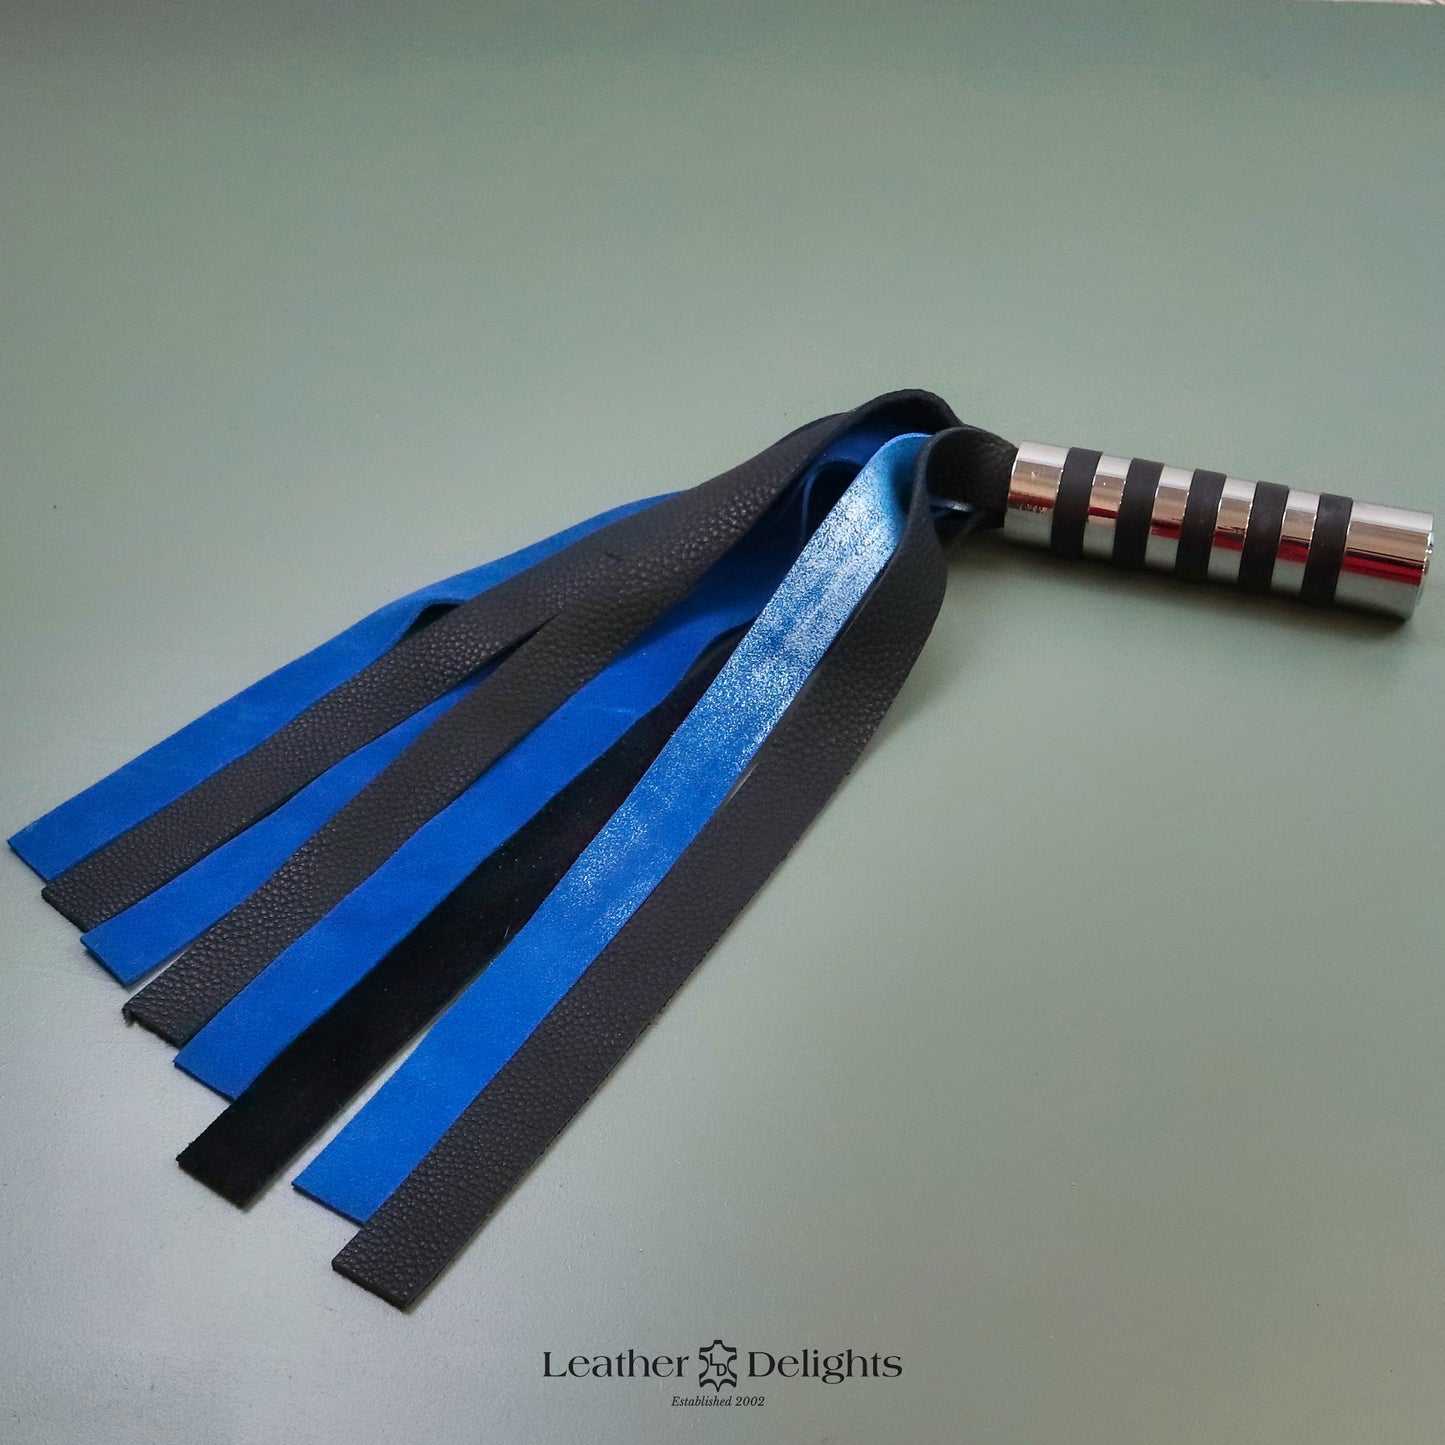 Tarnished Metallic Blue Suede and Black Leather Flogger with Silver Handle